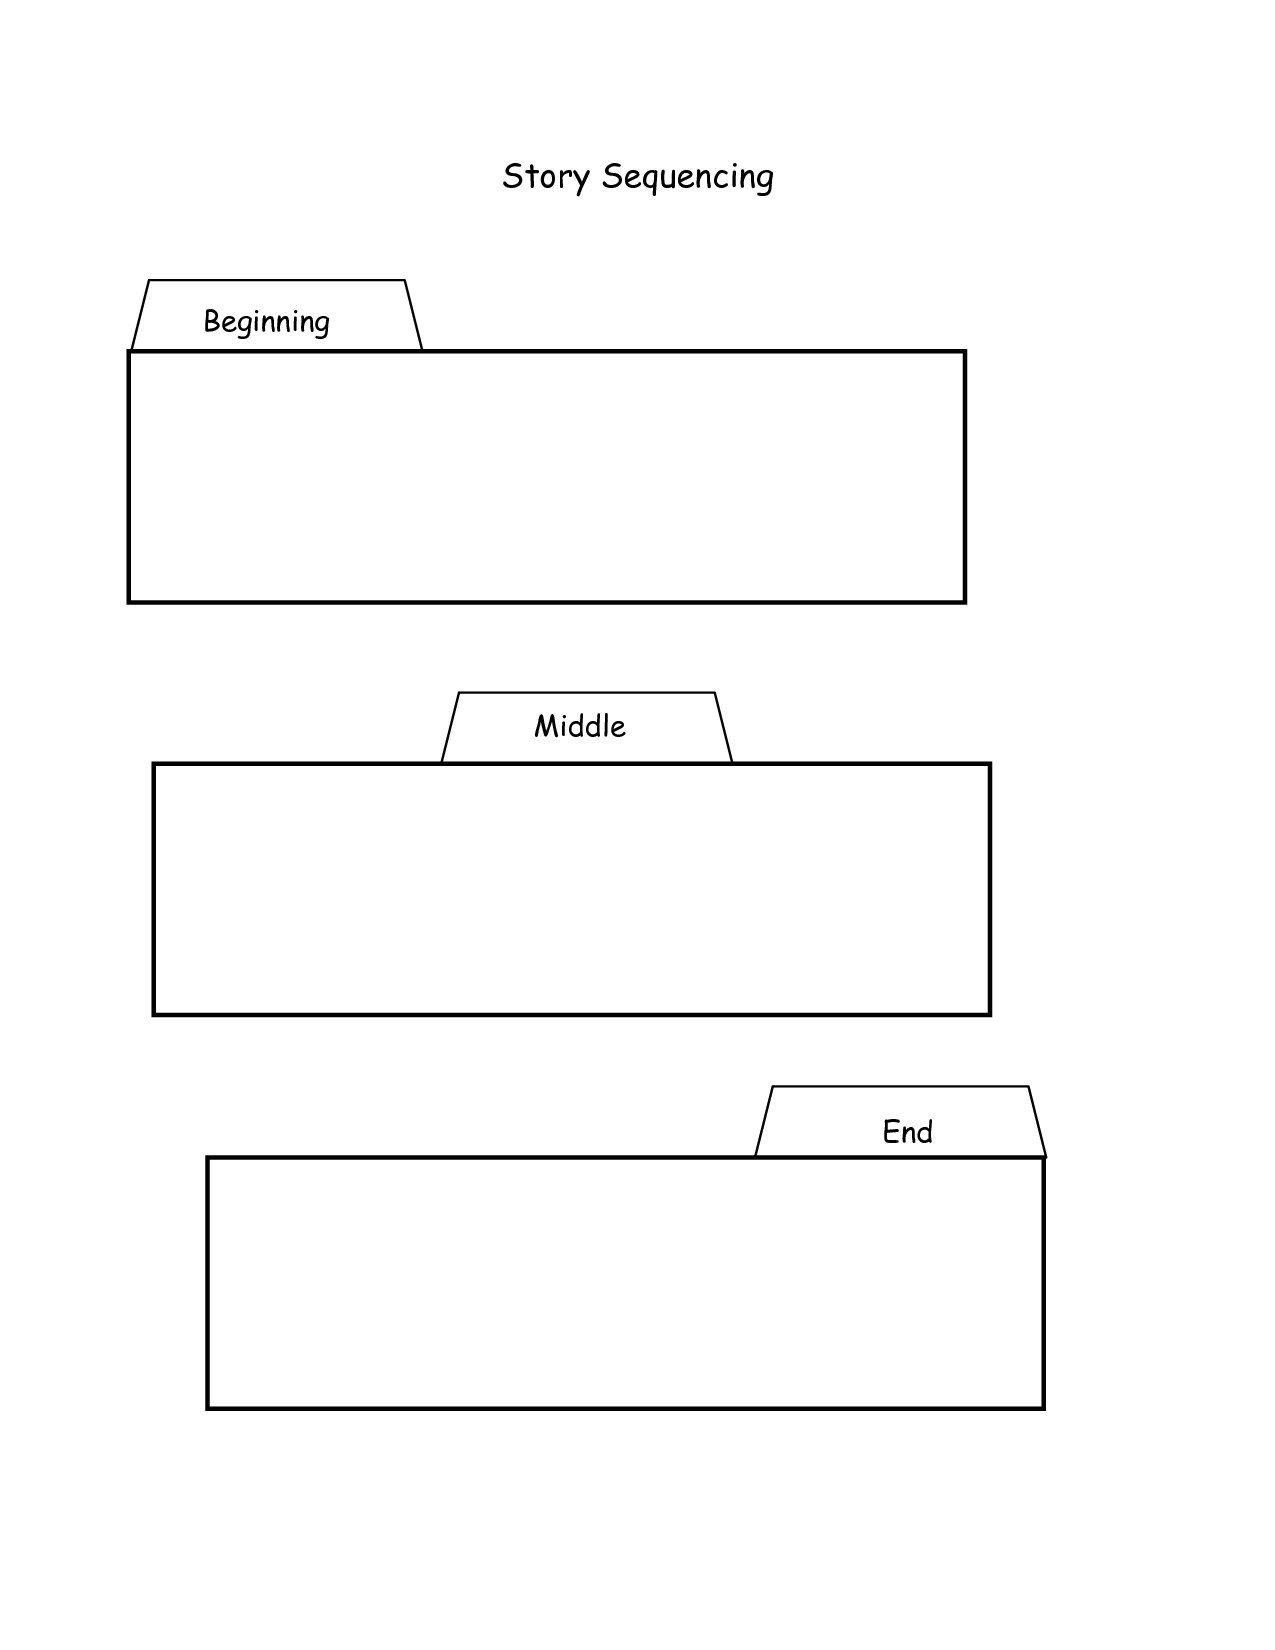 16 Best Images of Story Sequencing Worksheets First Grade - Story